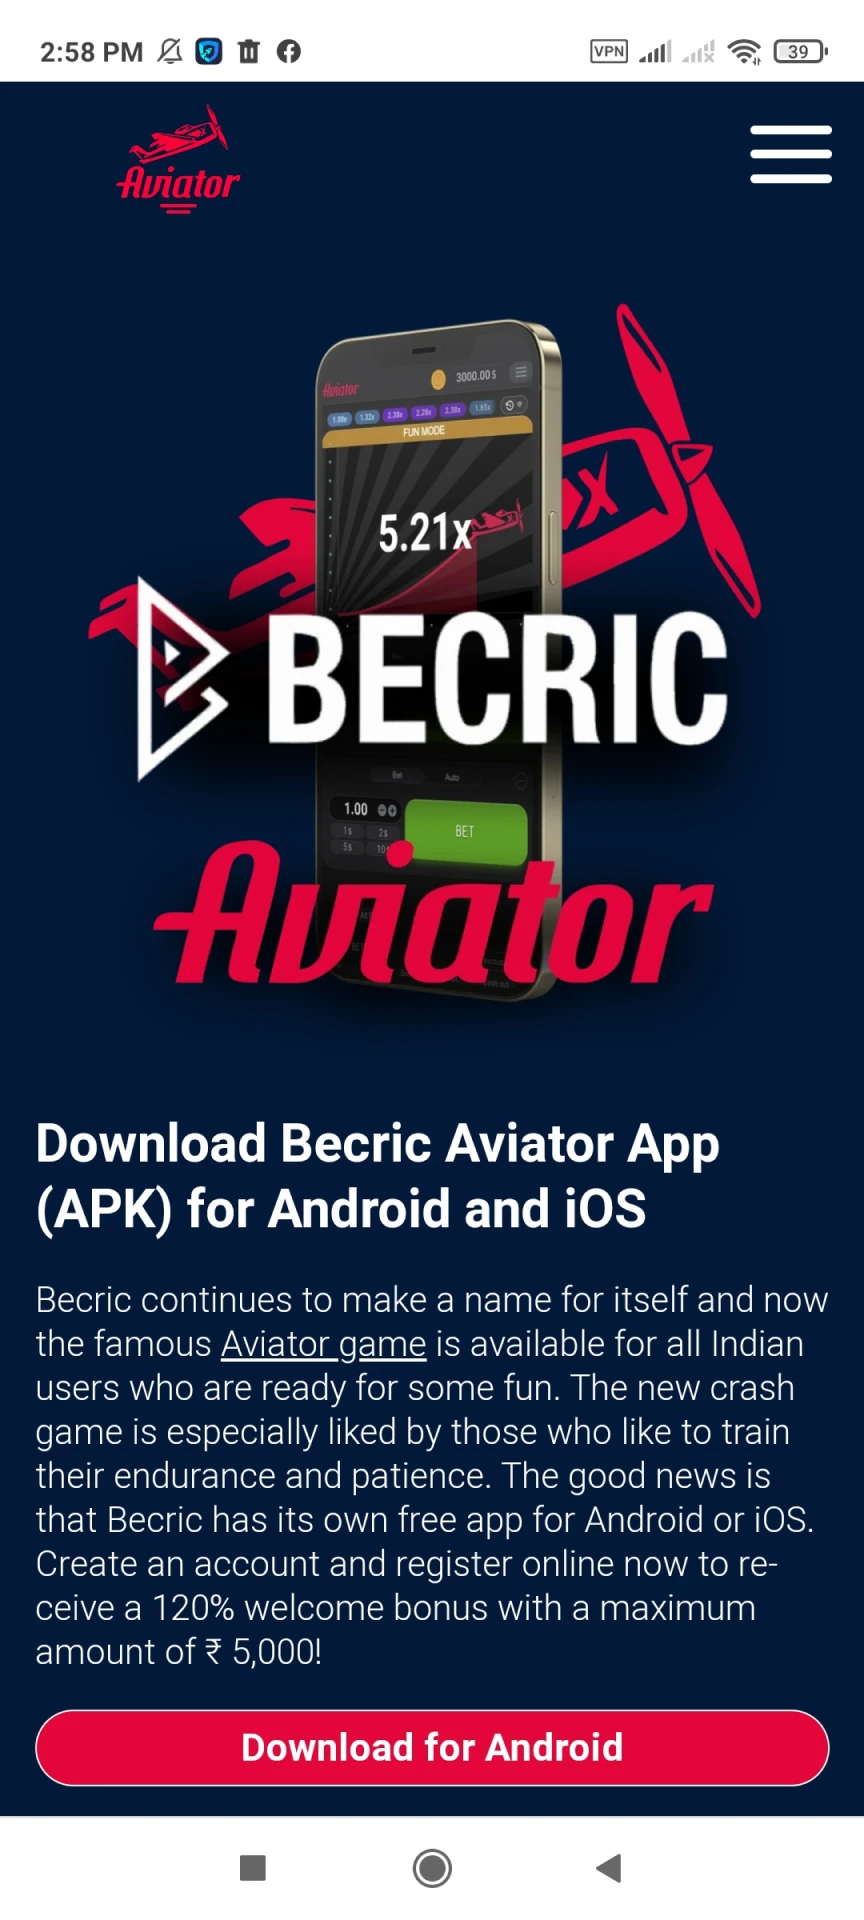 Play Aviator through the Becric app on Android.